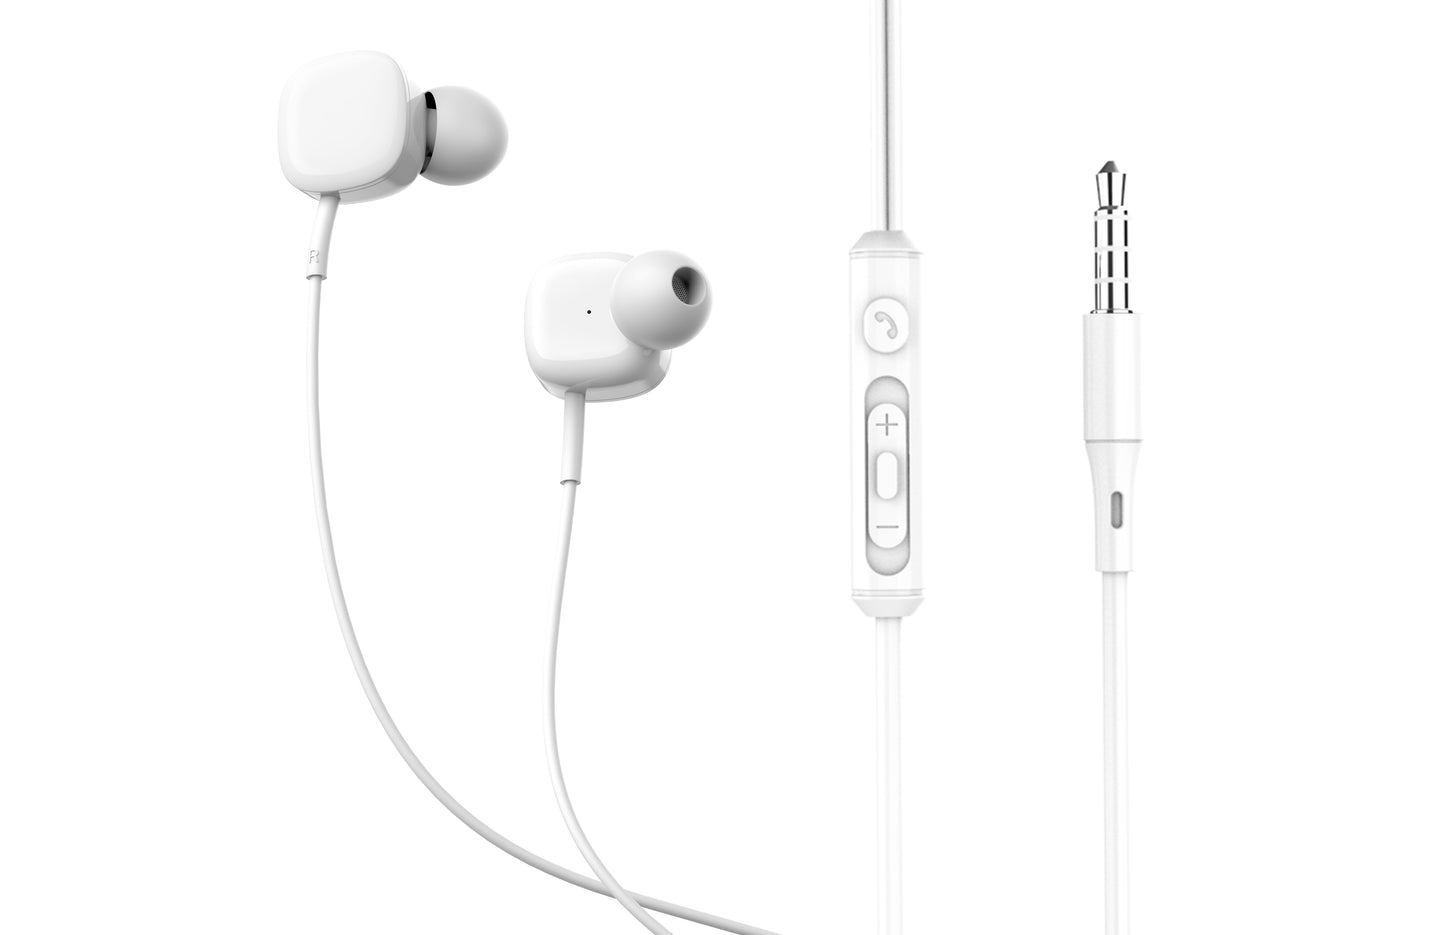 Tellur Basic Sigma Wired In-Ear Headphones, White - Elegant Design and High Quality Sound